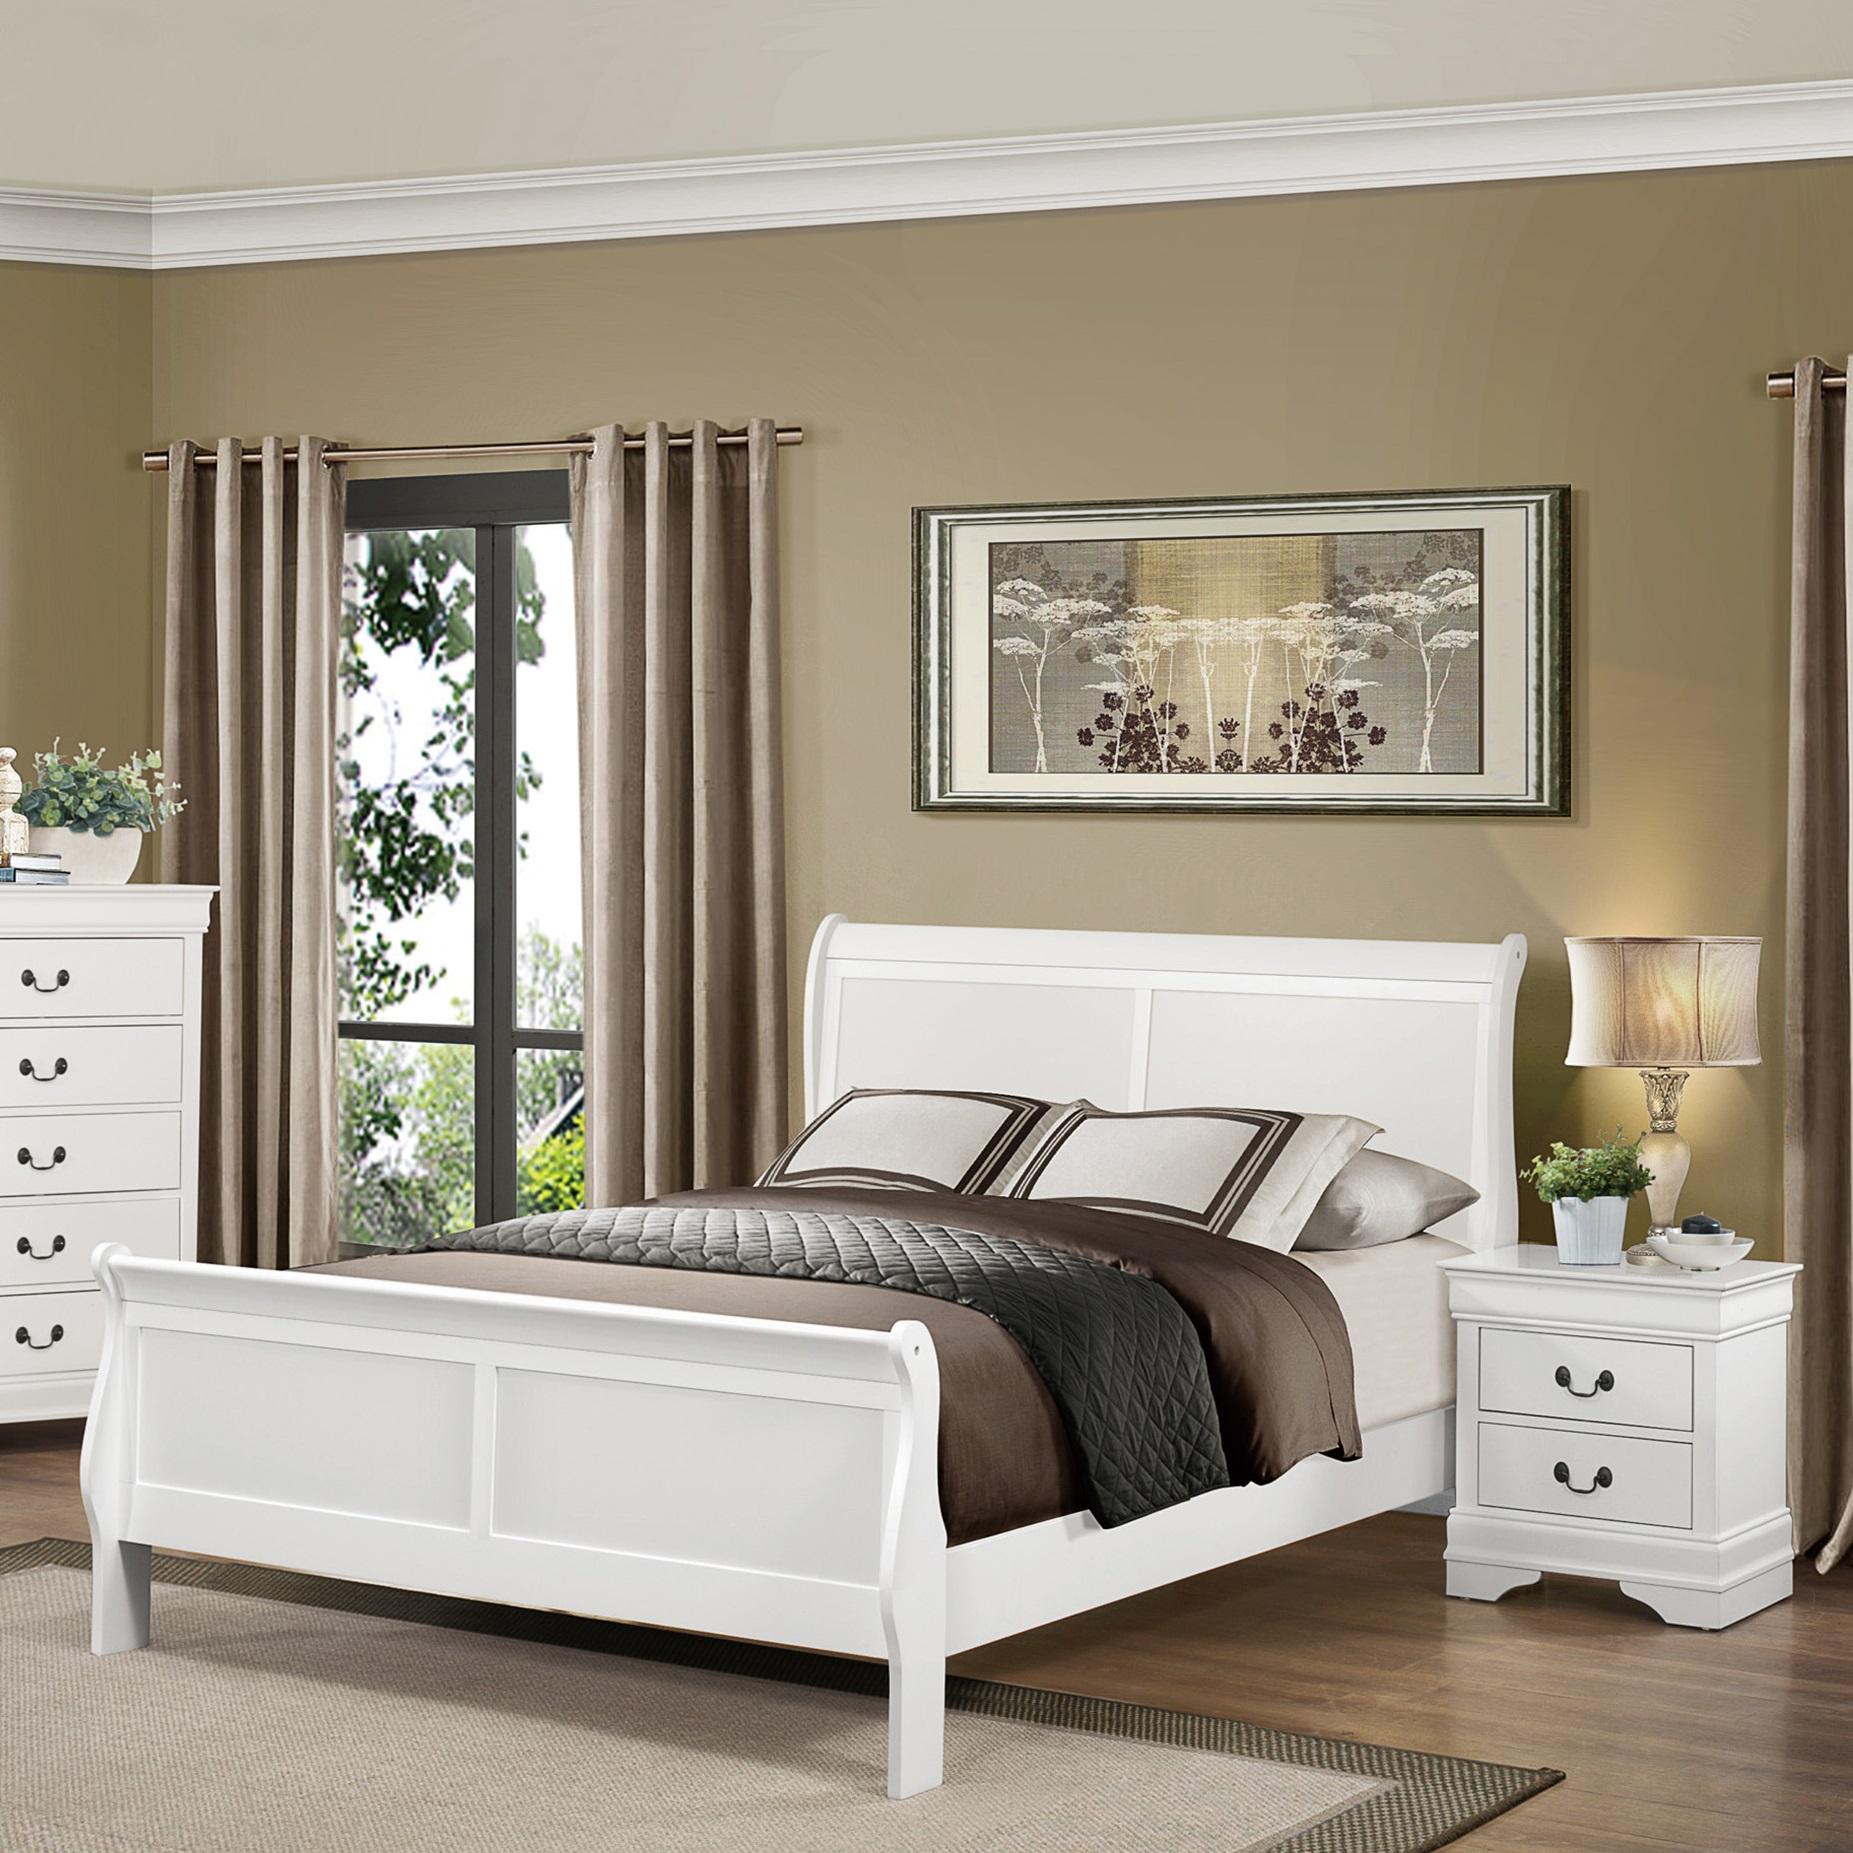 Traditional Bedroom Set 2147KW-1CK-3PC Mayville 2147KW-1CK-3PC in White 